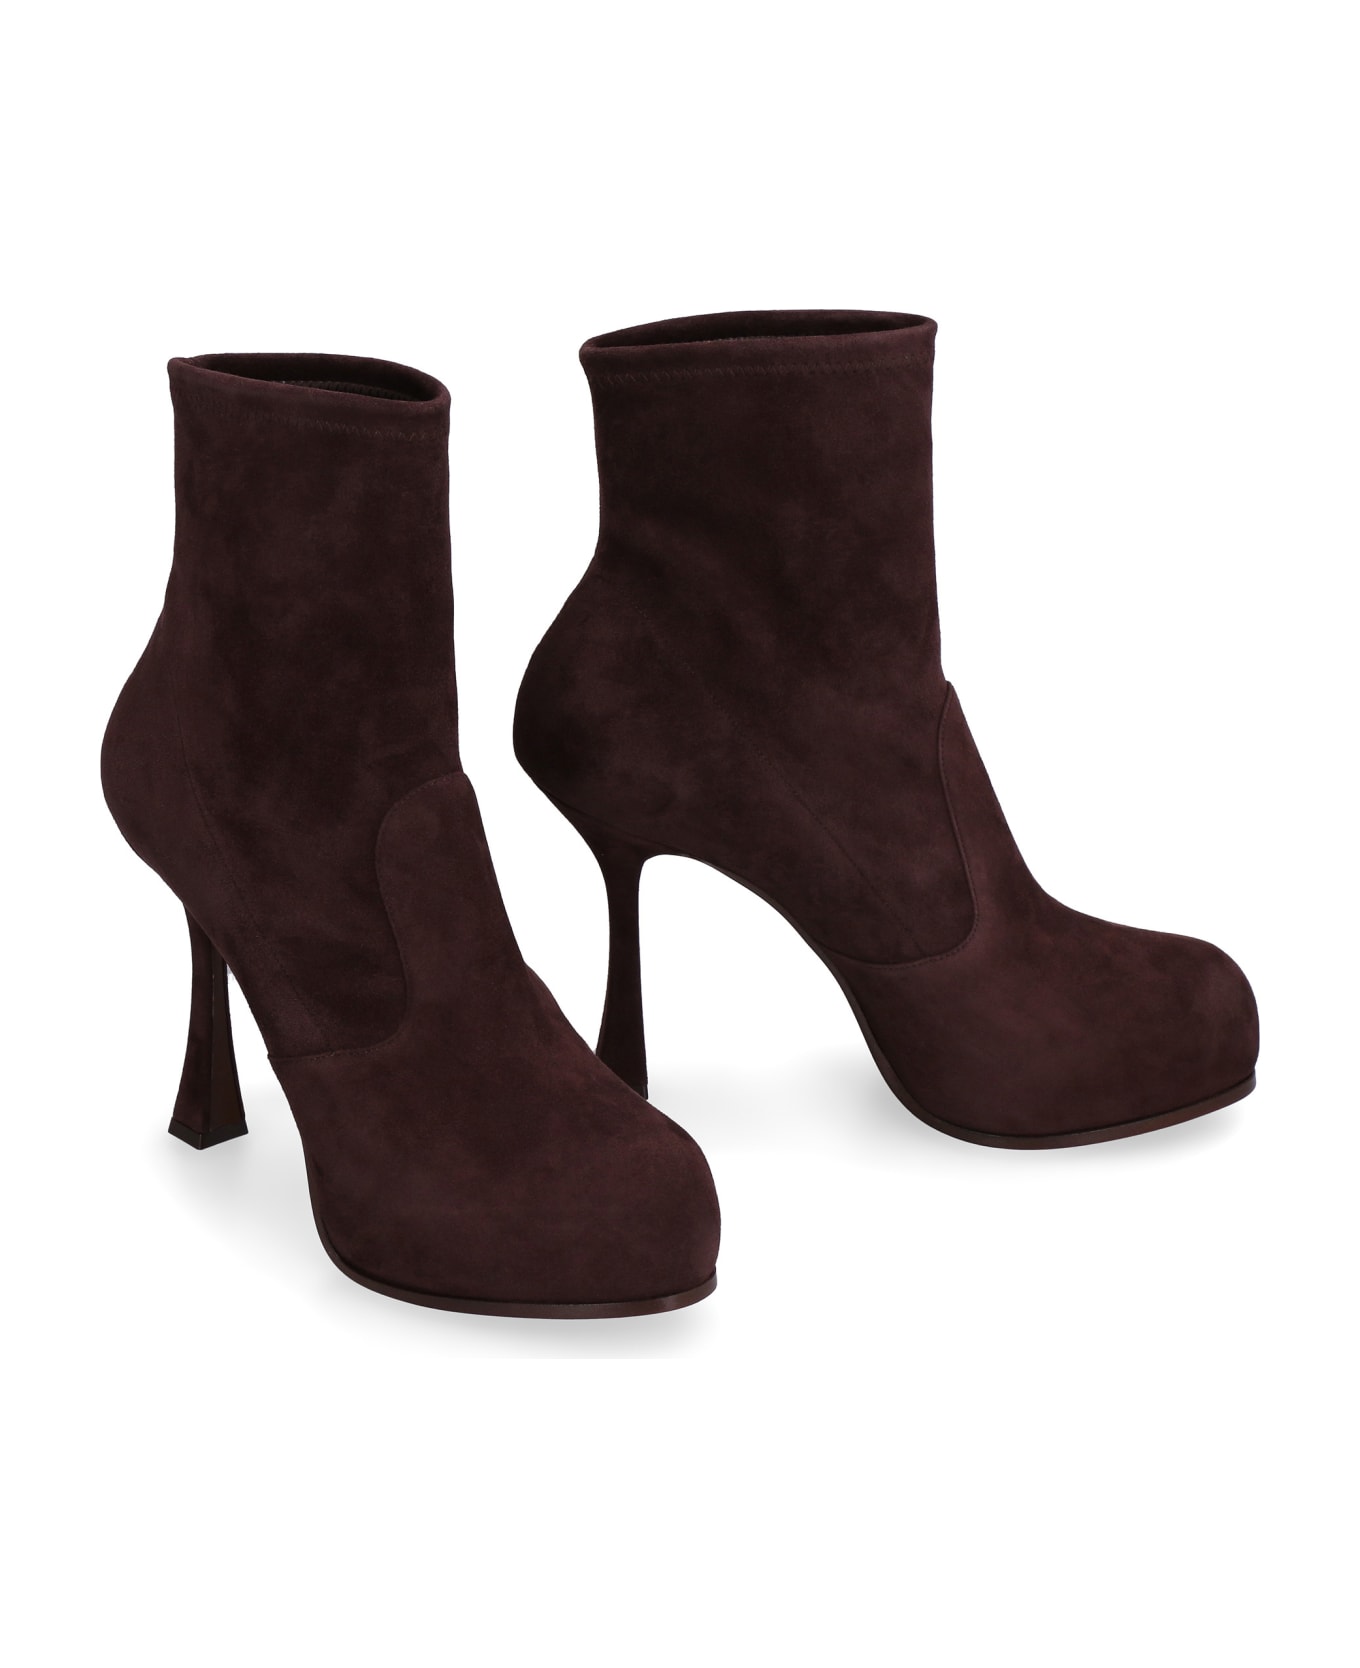 Casadei Suede Ankle Boots - brown ブーツ